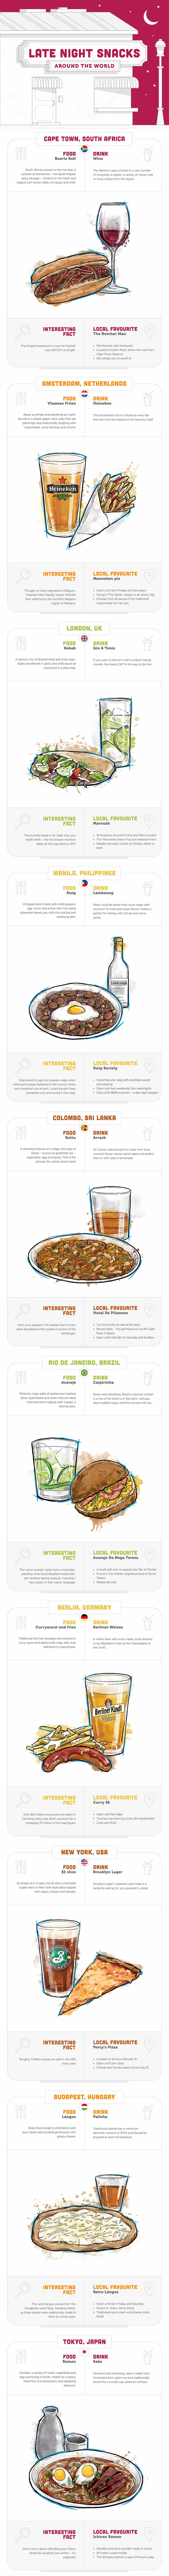 Late Night Snacks to enjoy on your city break infographic